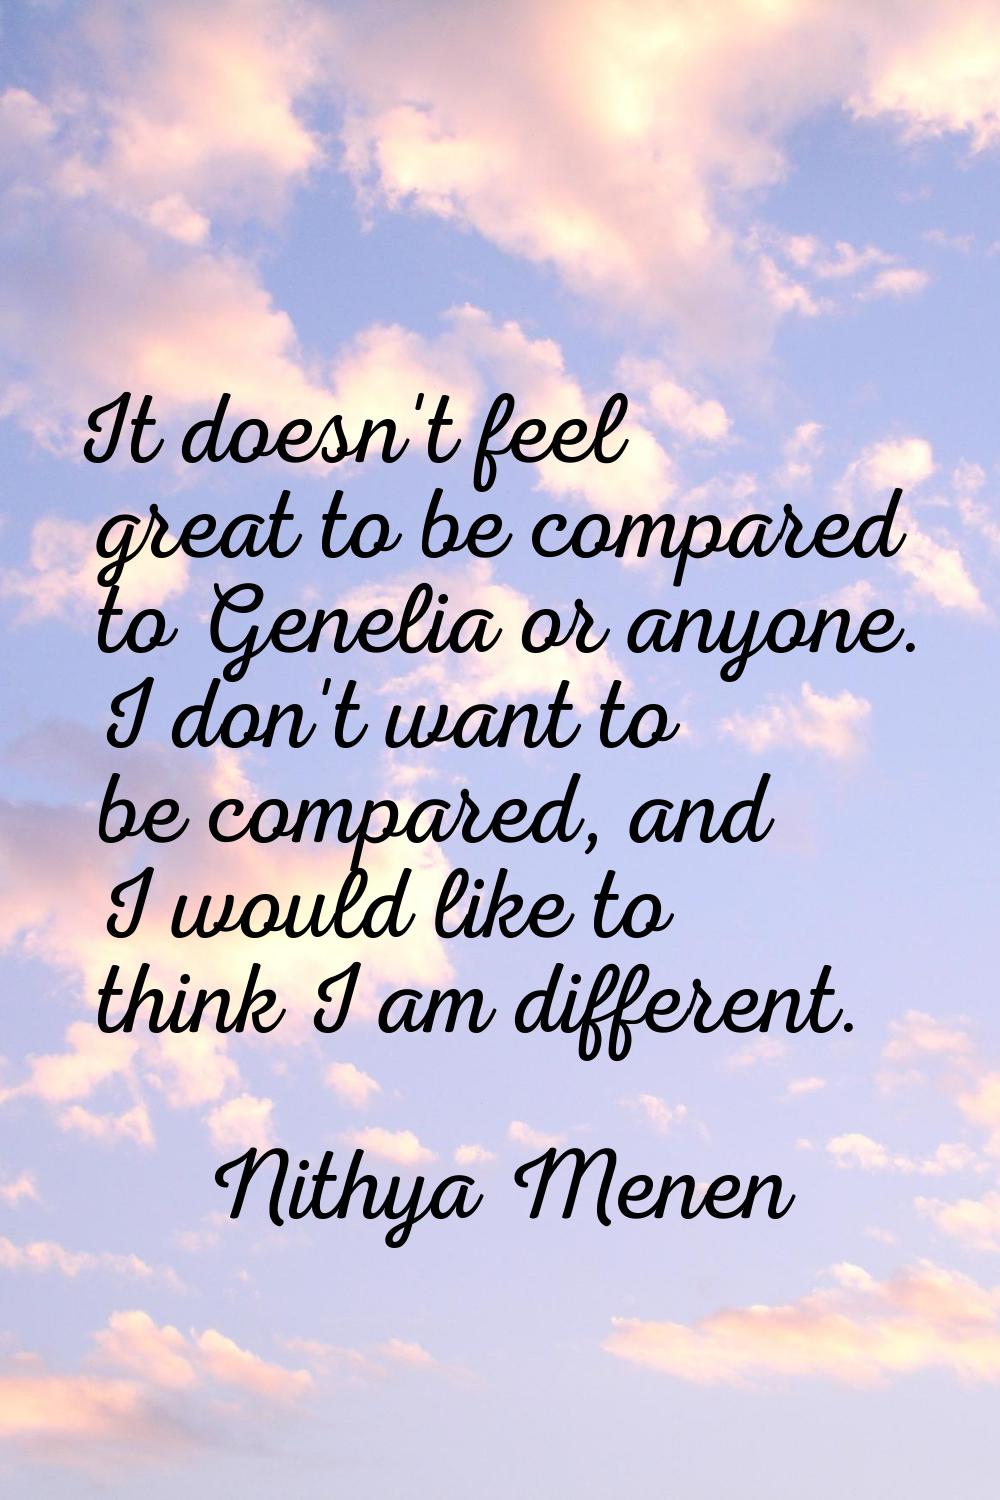 It doesn't feel great to be compared to Genelia or anyone. I don't want to be compared, and I would